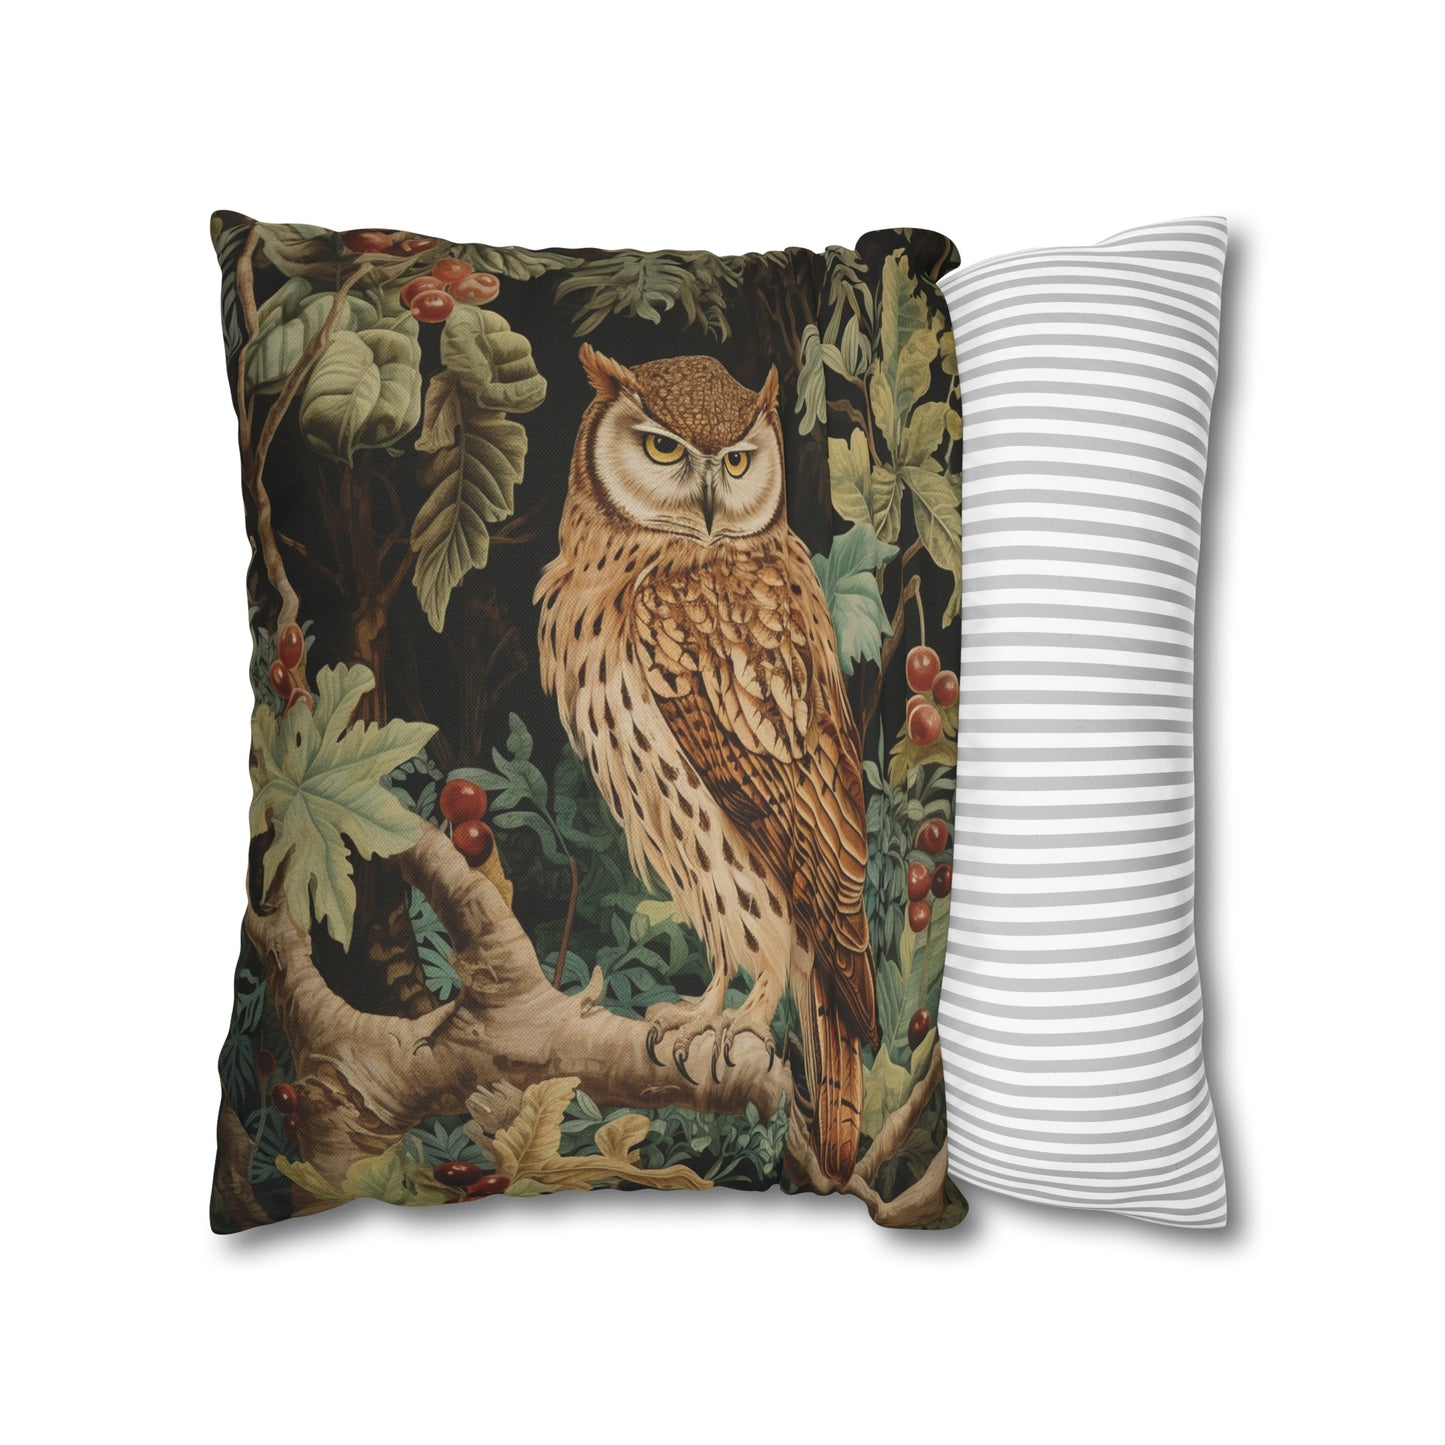 Enchanted Woodland Owl Pillow William Morris Inspired